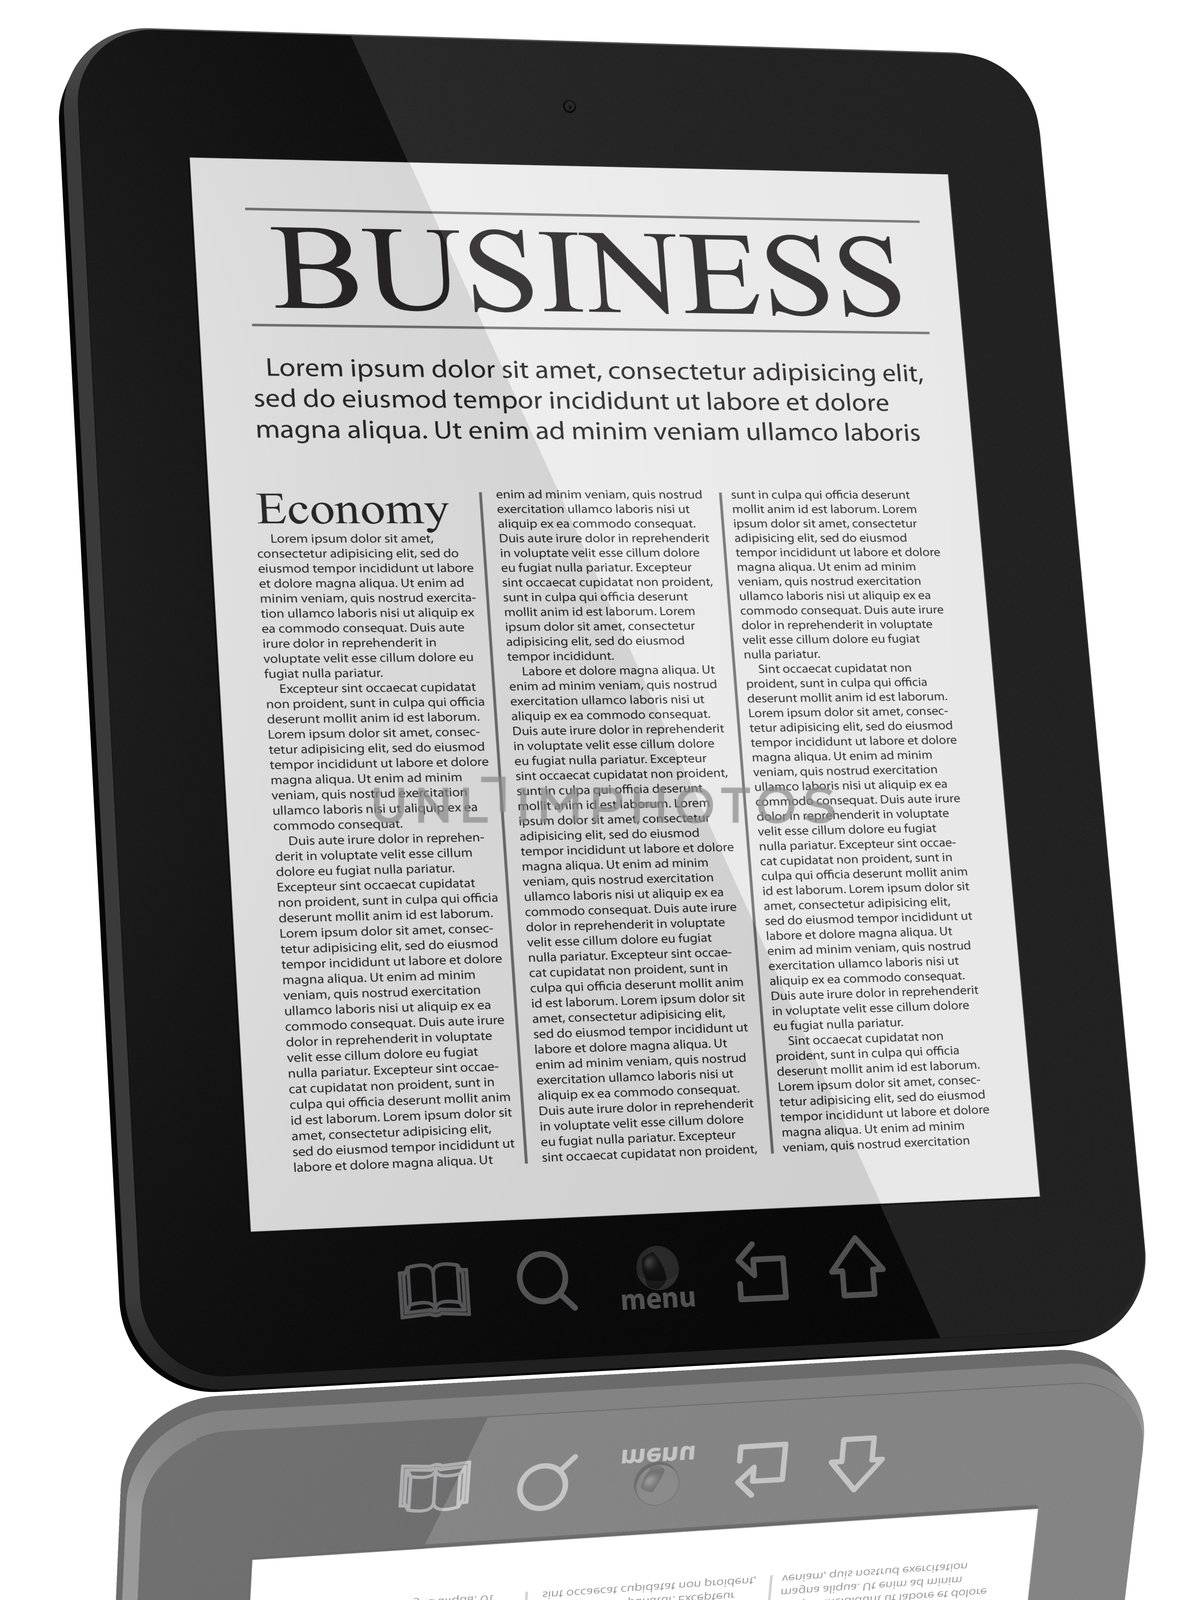 Business News on Tablet PC Computer by adamr